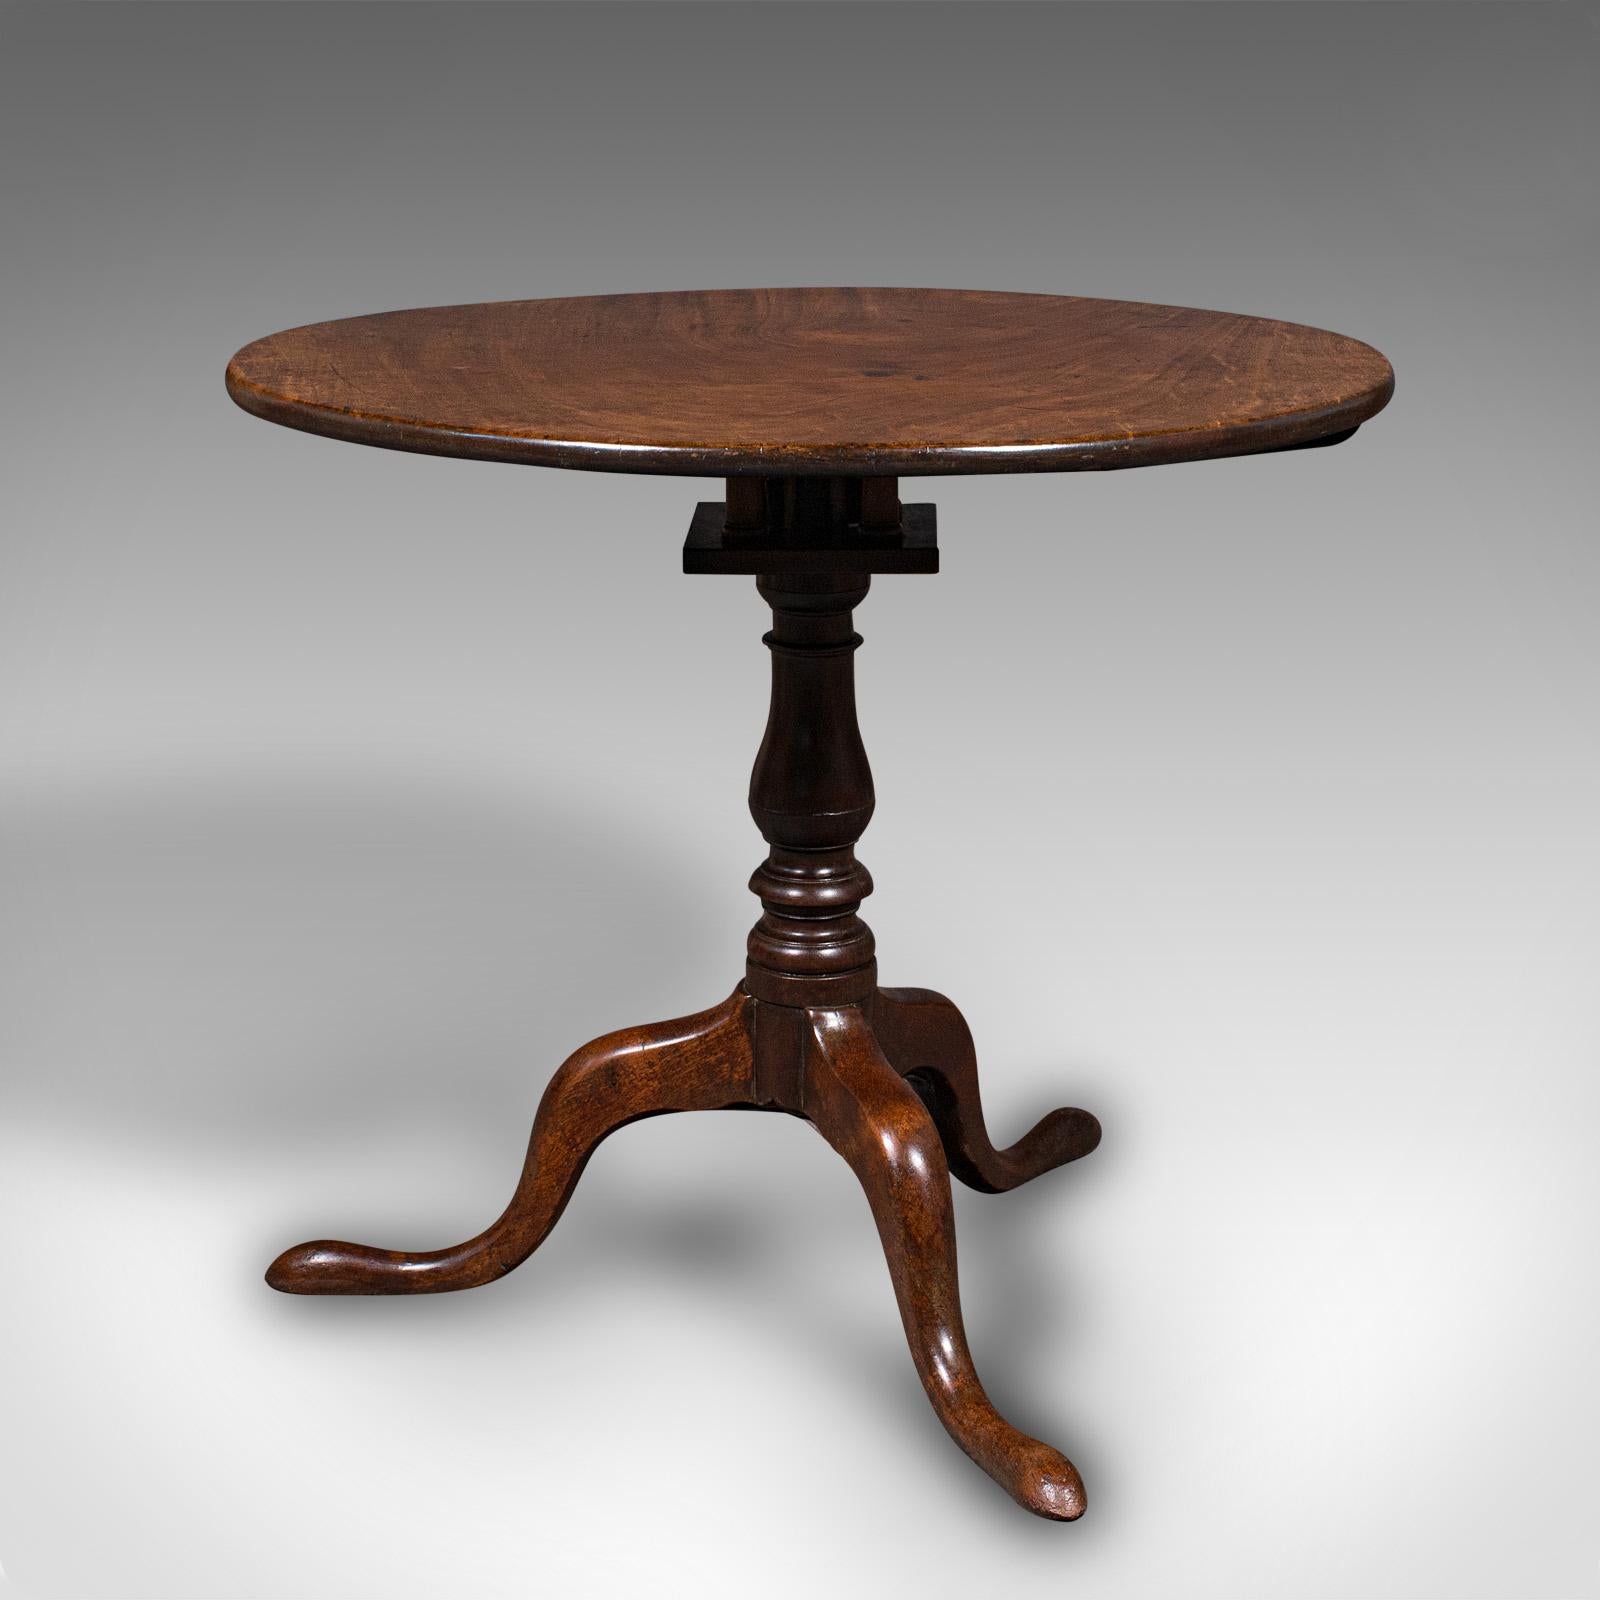 Wood Antique Occasional Table, English, Tilt Top, Lamp, Afternoon Tea, Georgian, 1800 For Sale